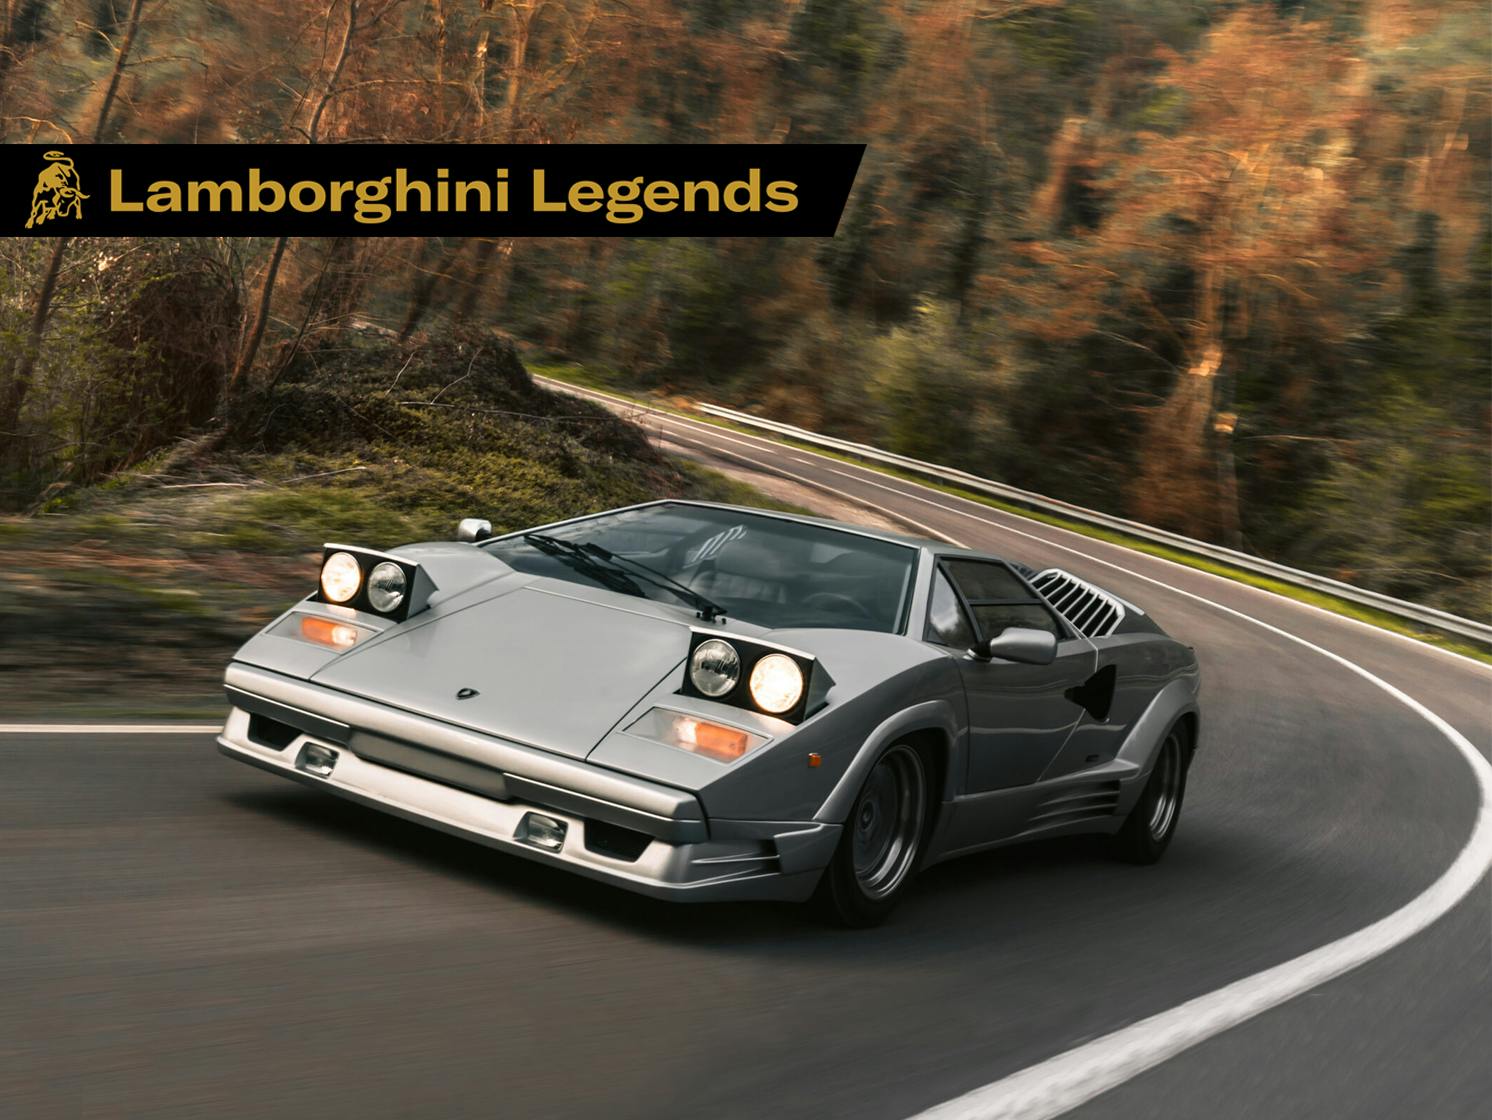 Driving my childhood dream car, the Countach, wasn't what I